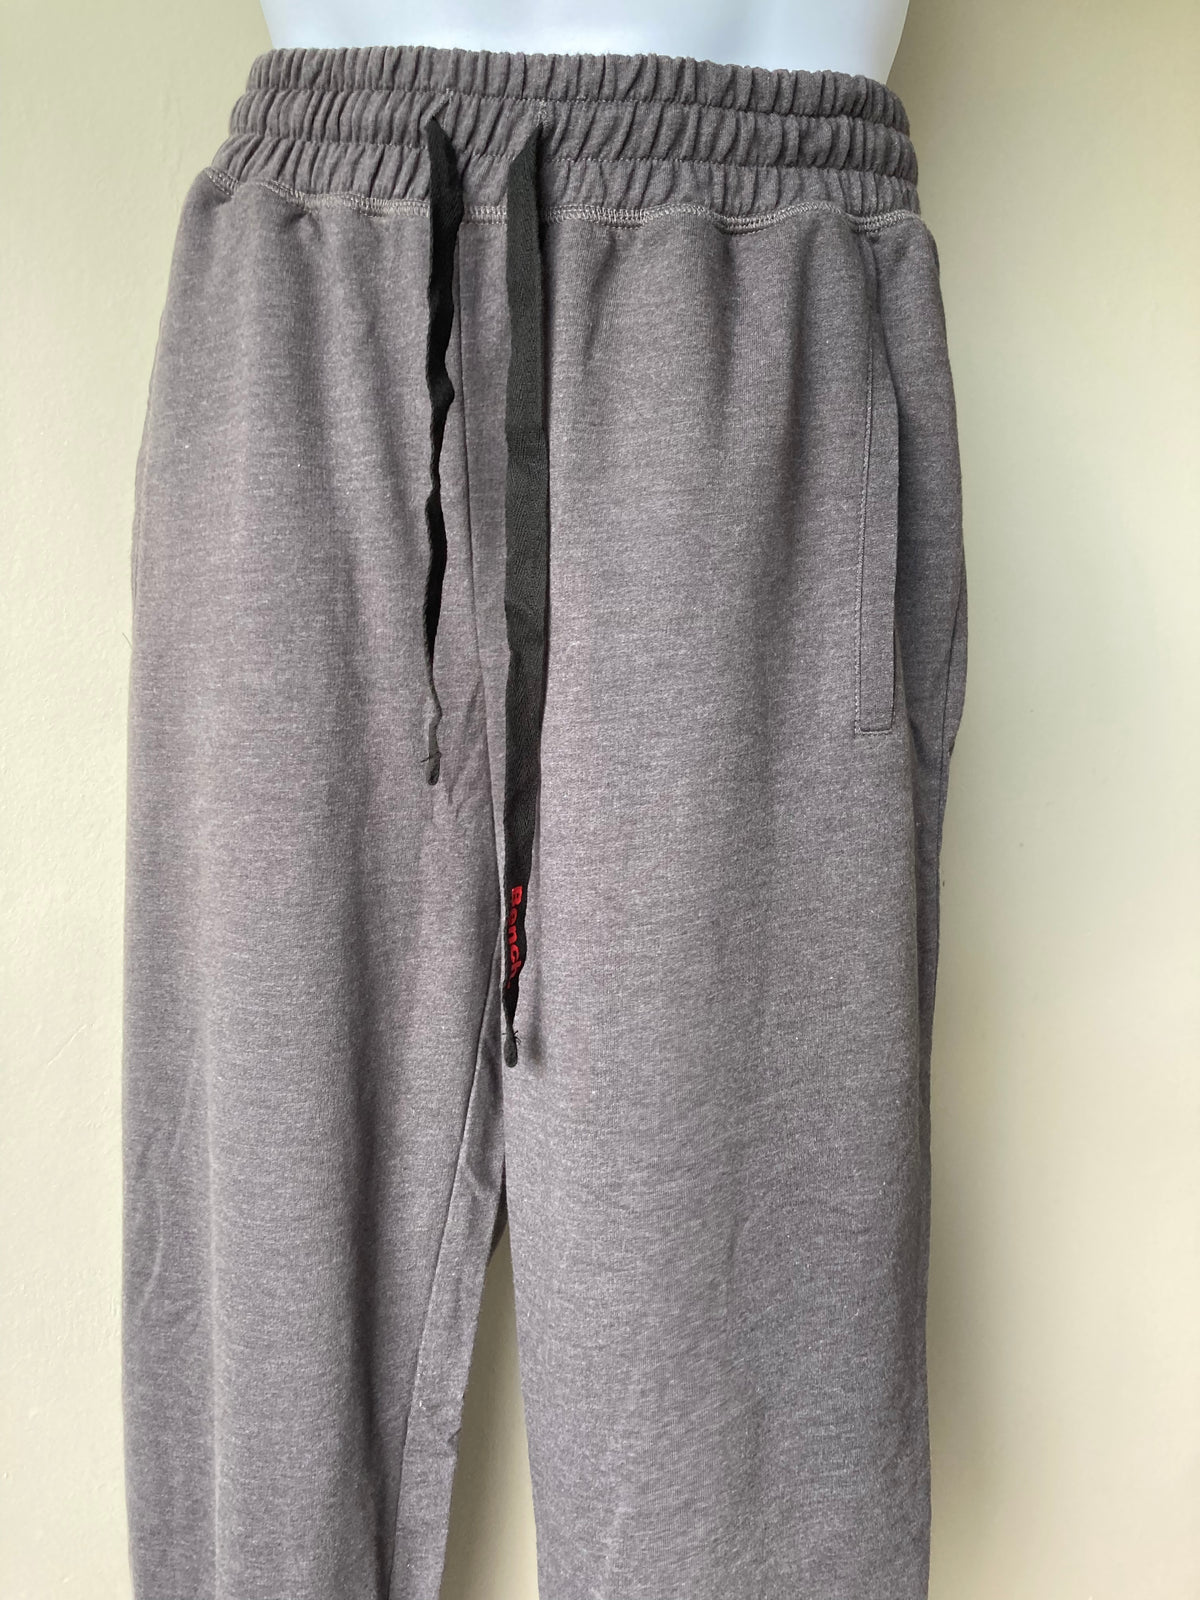 Marl Relax Pants by BENCH - Size S Men’s